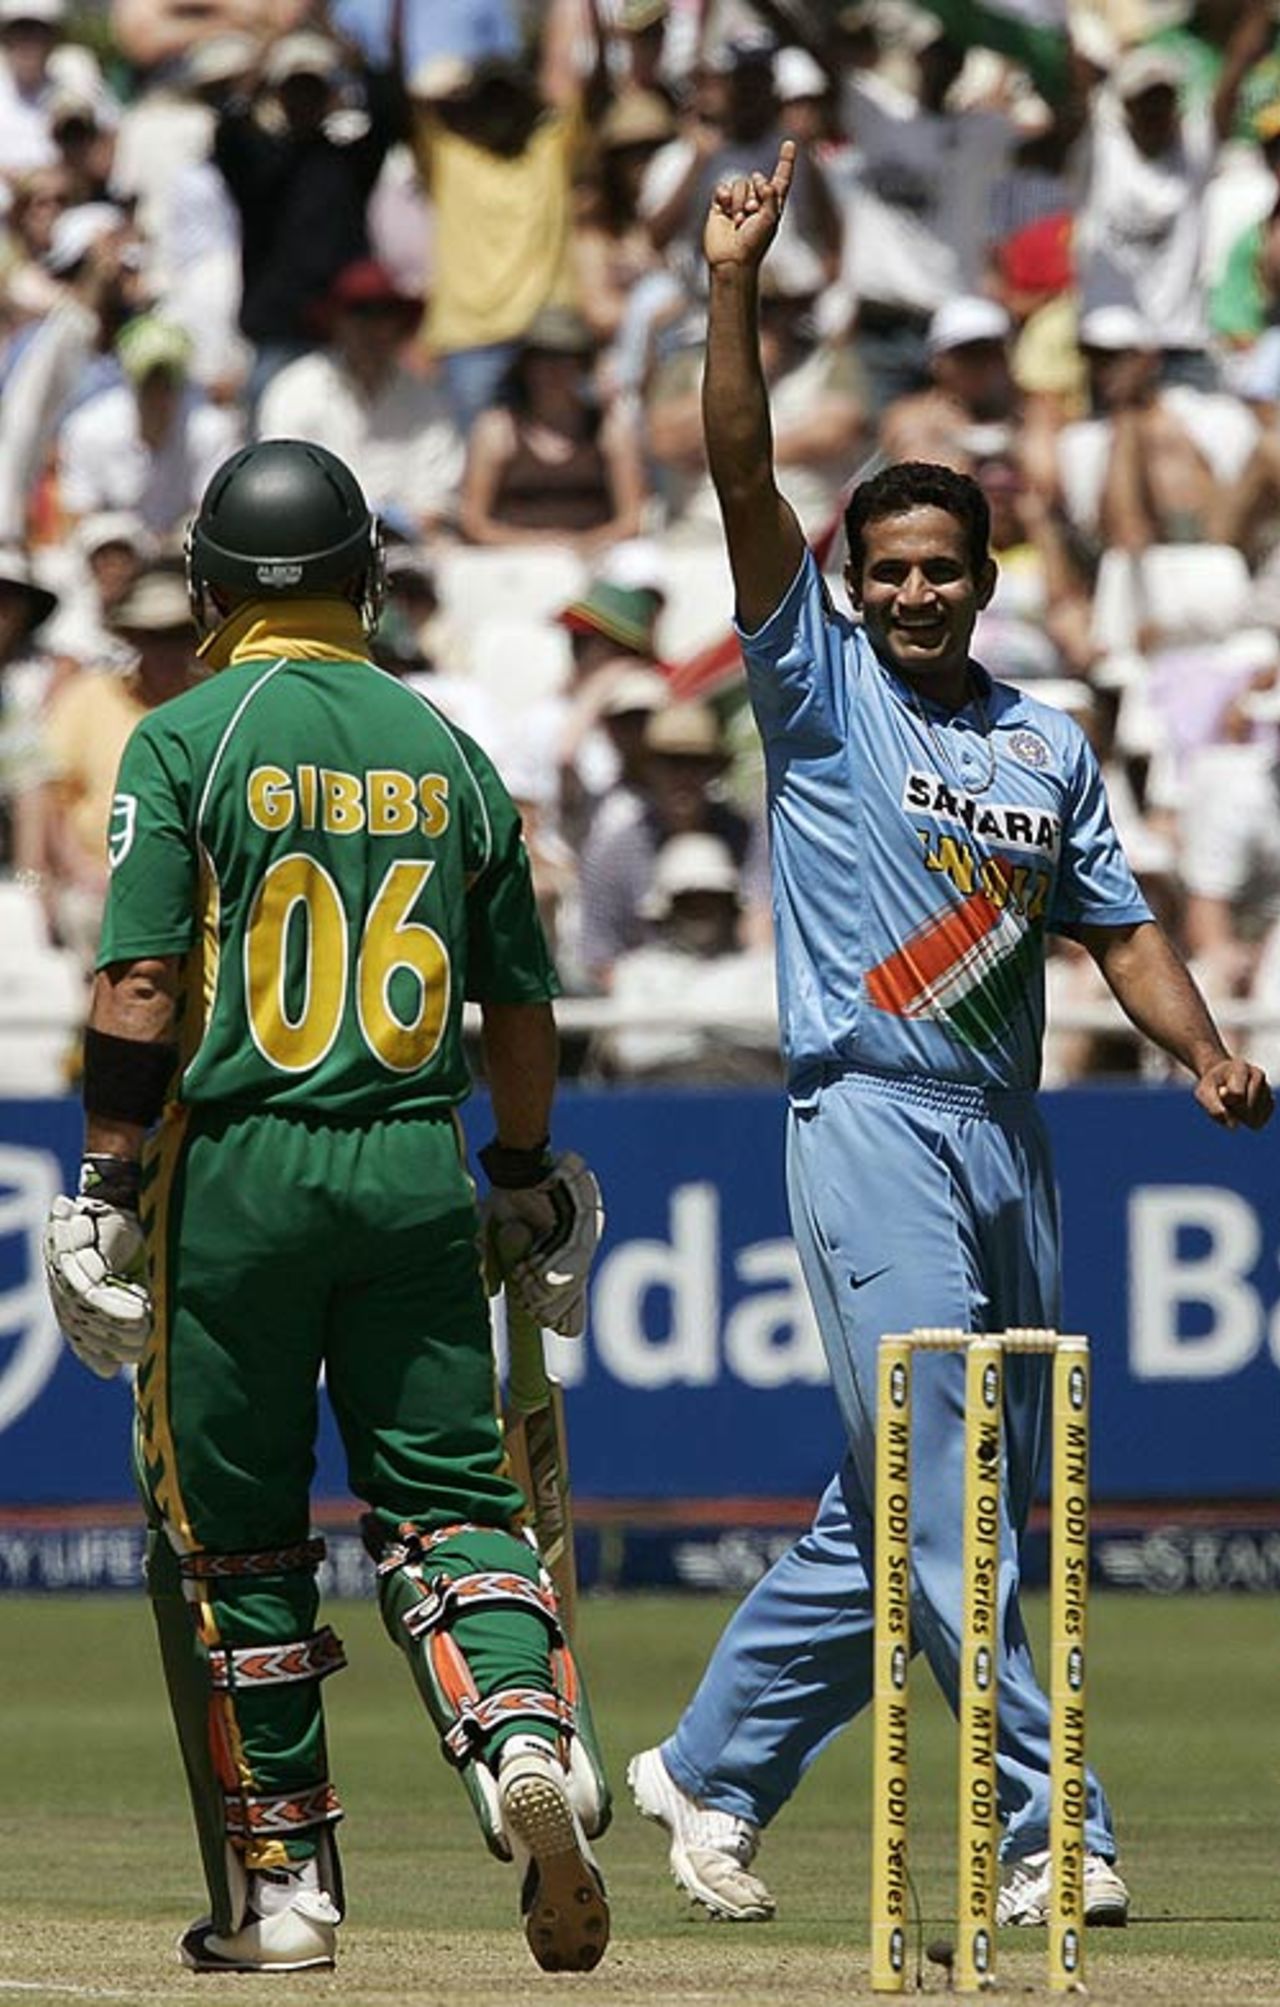 Irfan Pathan rejoices after dismissing Herschelle Gibbs, South Africa v India, 3rd ODI, Cape Town, November 26, 2006